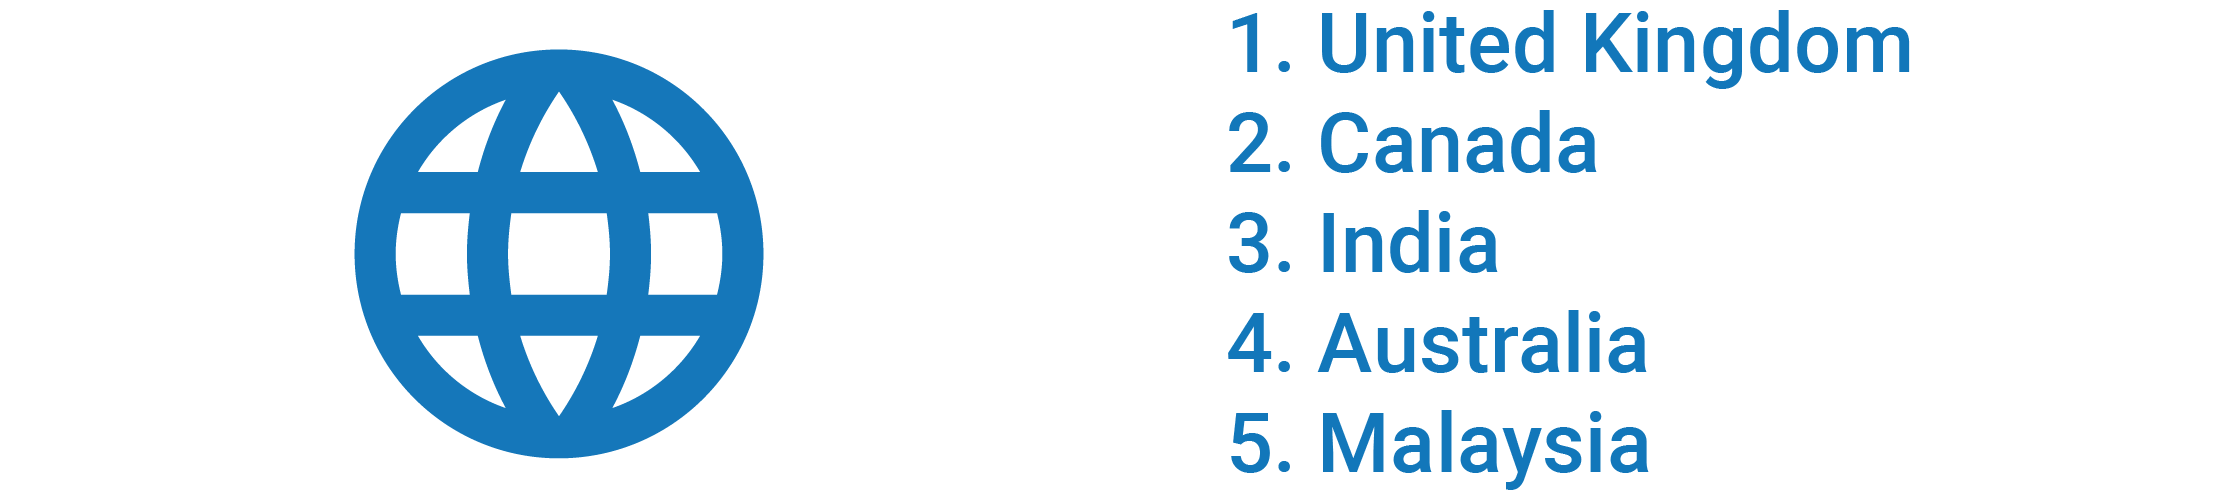 Top 5 Countries by Customer Count